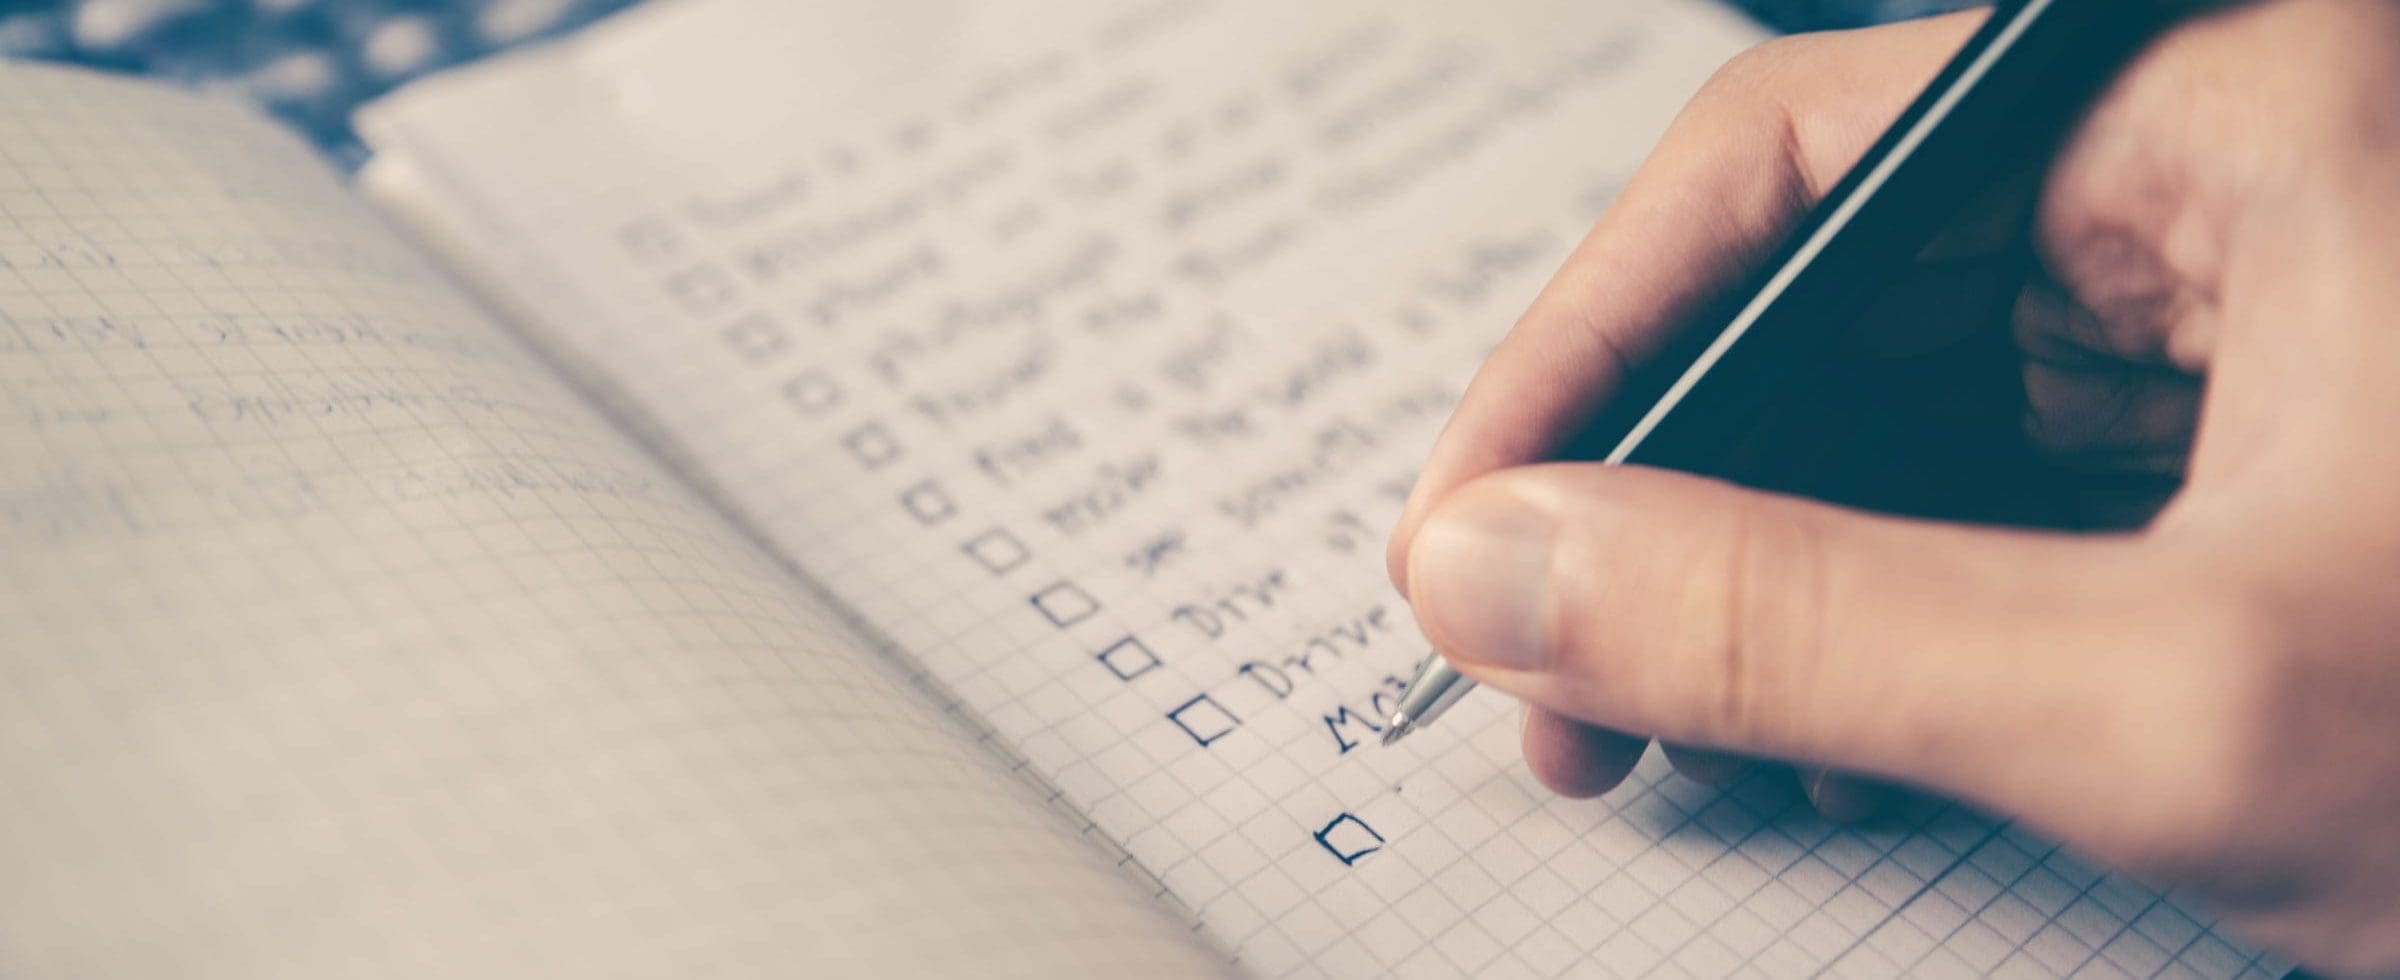 The Reliable WordPress Website Launch Checklist